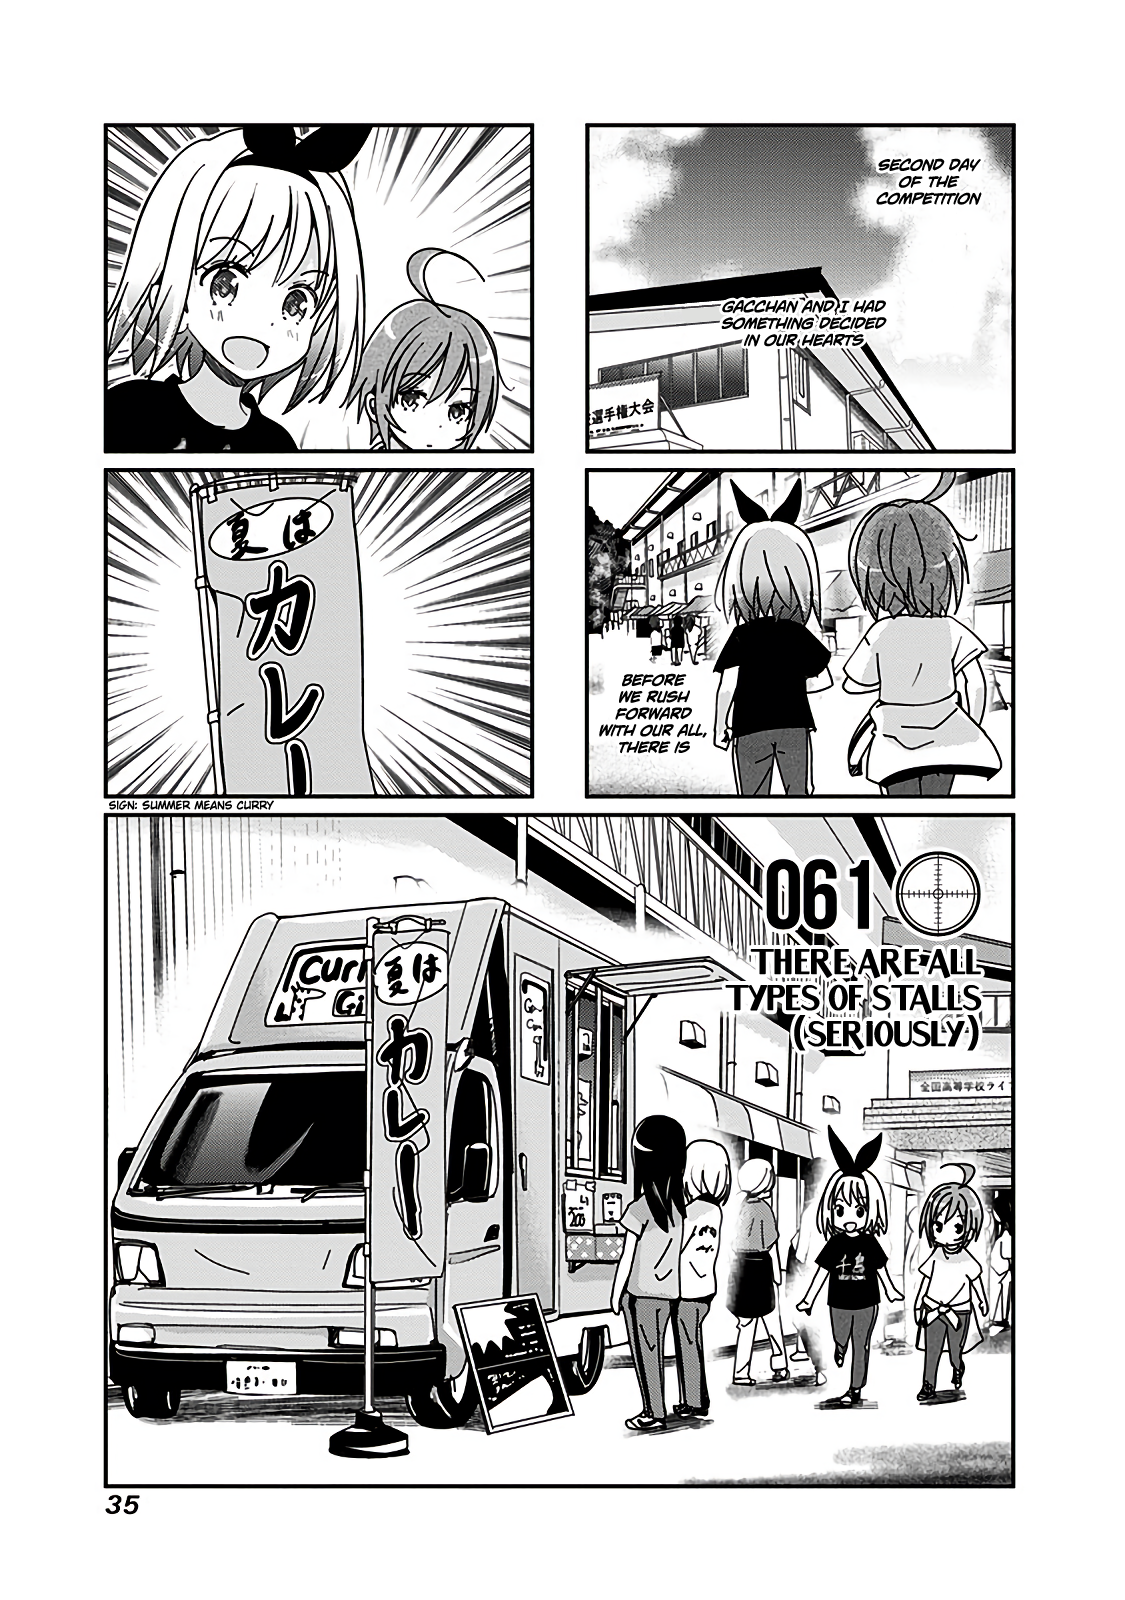 Rifle Is Beautiful Vol.4 Chapter 61: There Are All Types Of Stalls (Seriously) - Picture 2